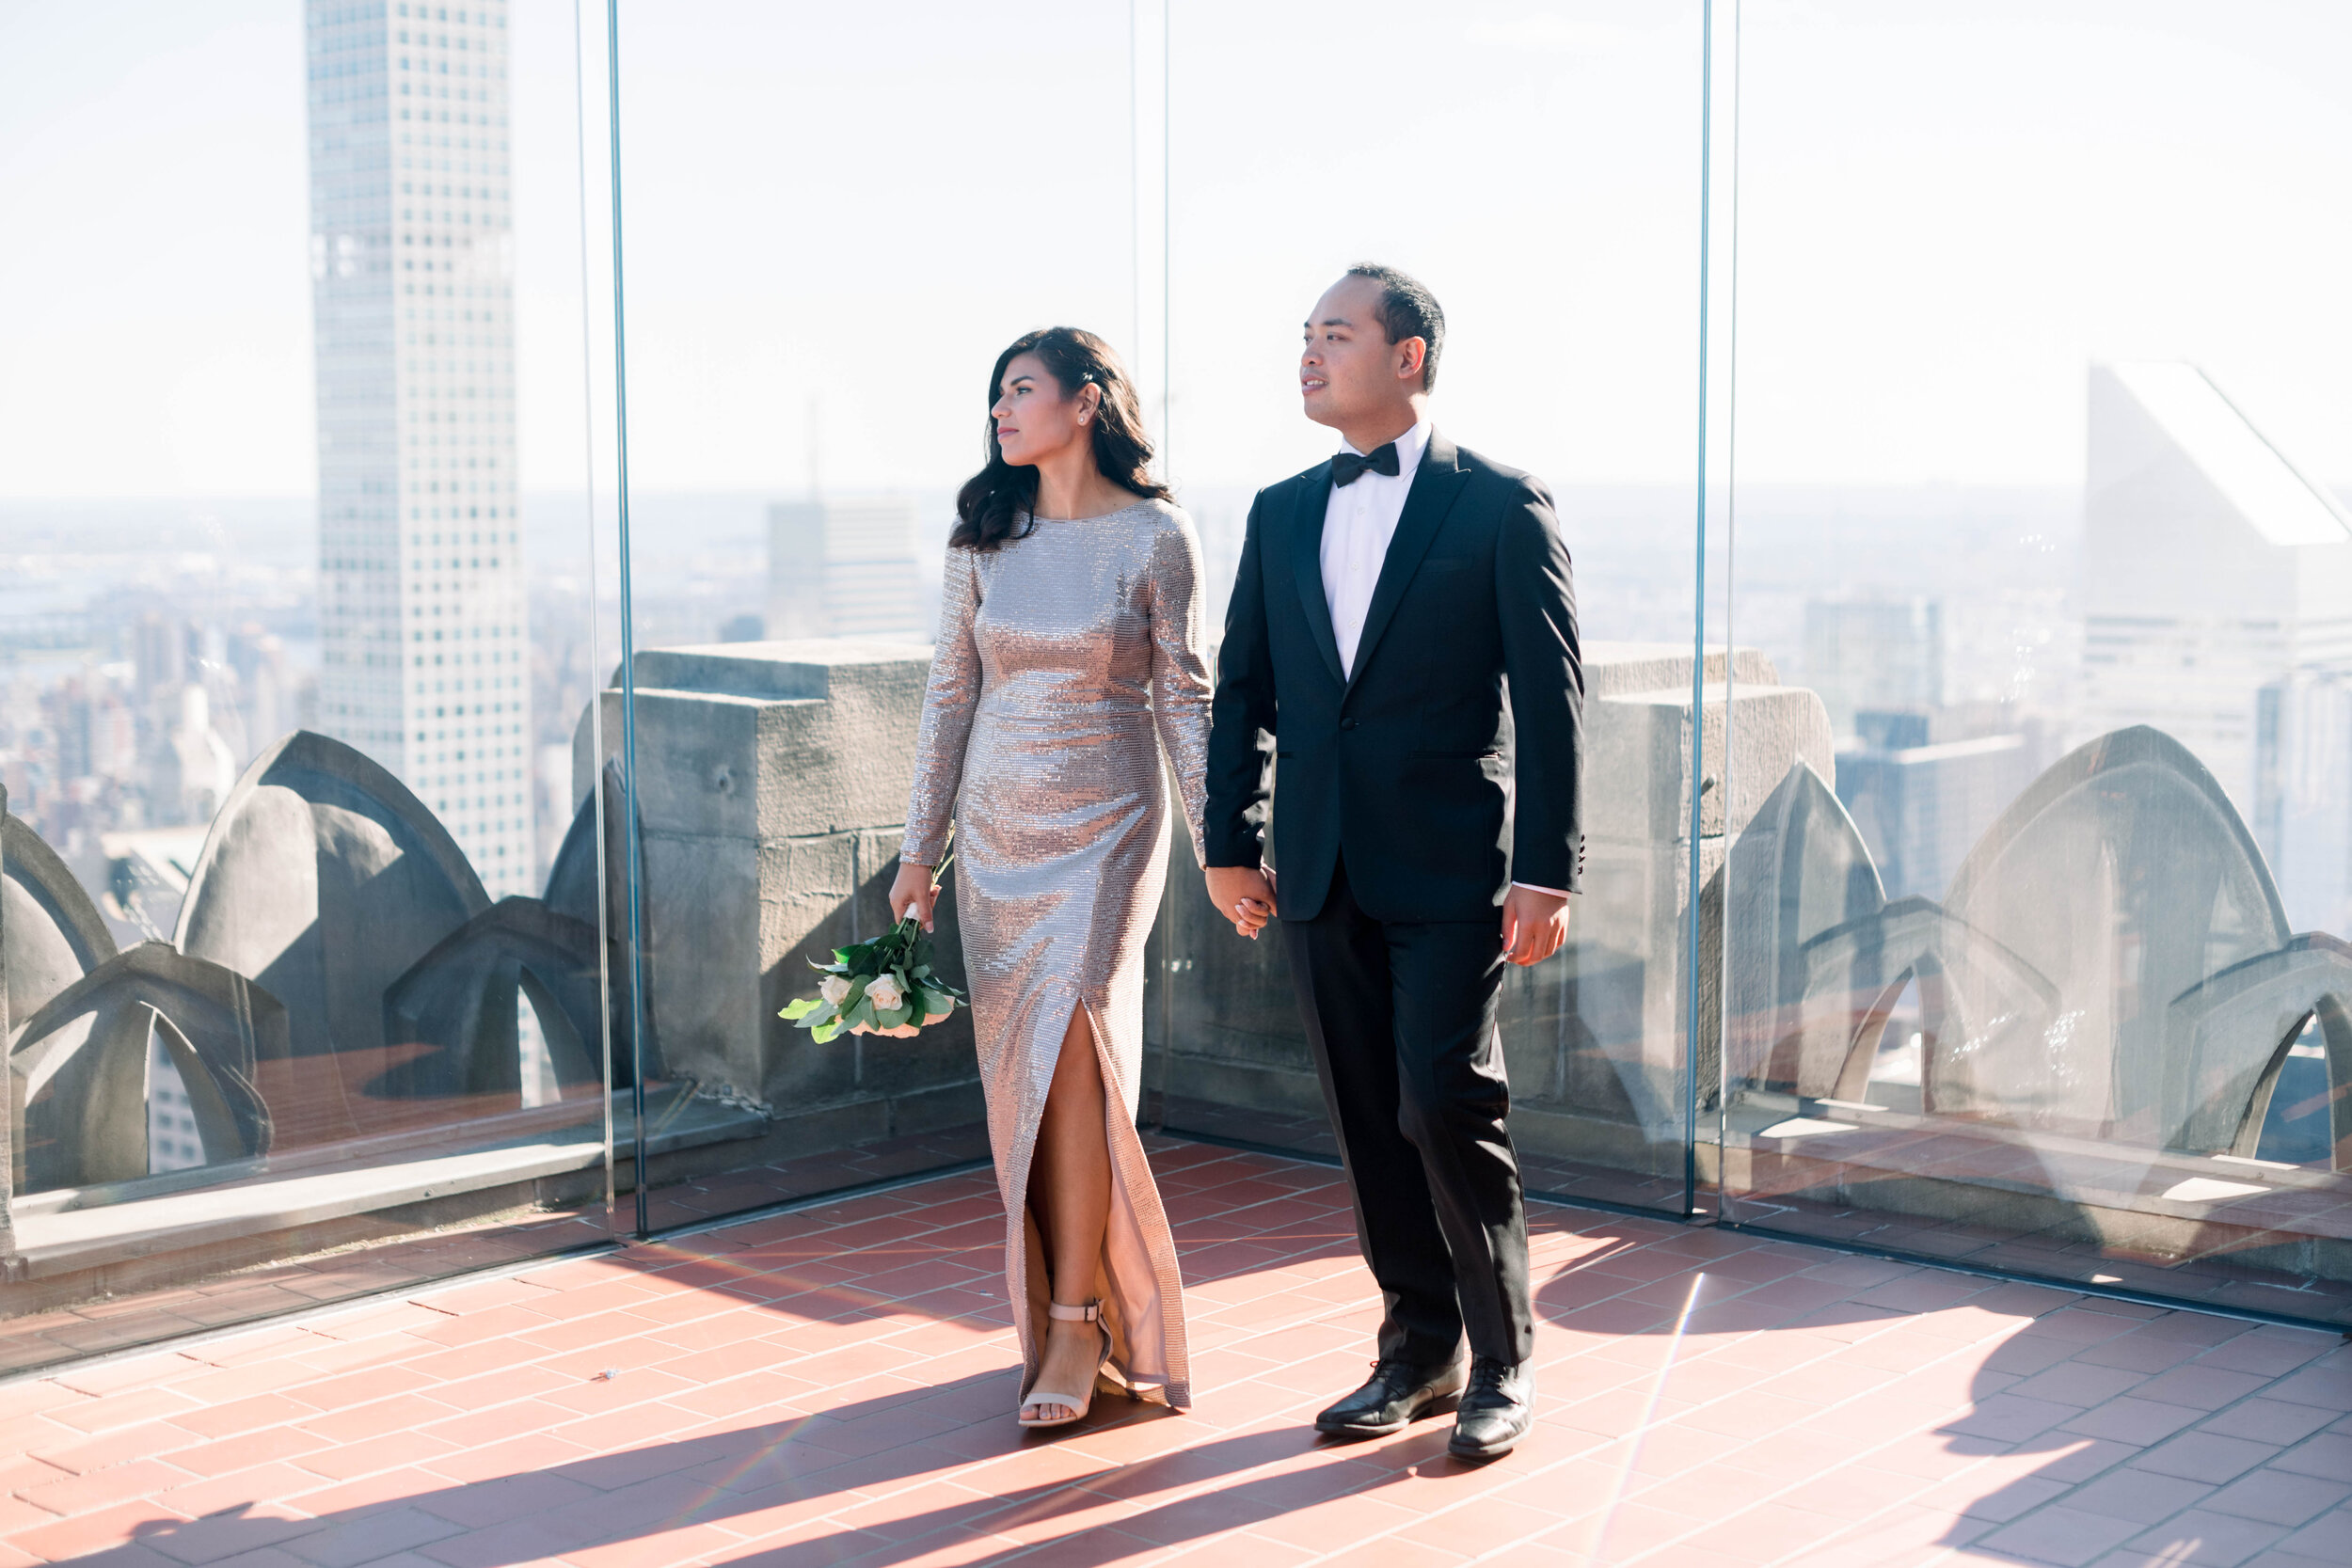 top of the rock+engagement+nyc engagement+NYC elopement+sparkly wedding gown+gold wedding gown+white bouquet+modern wedding